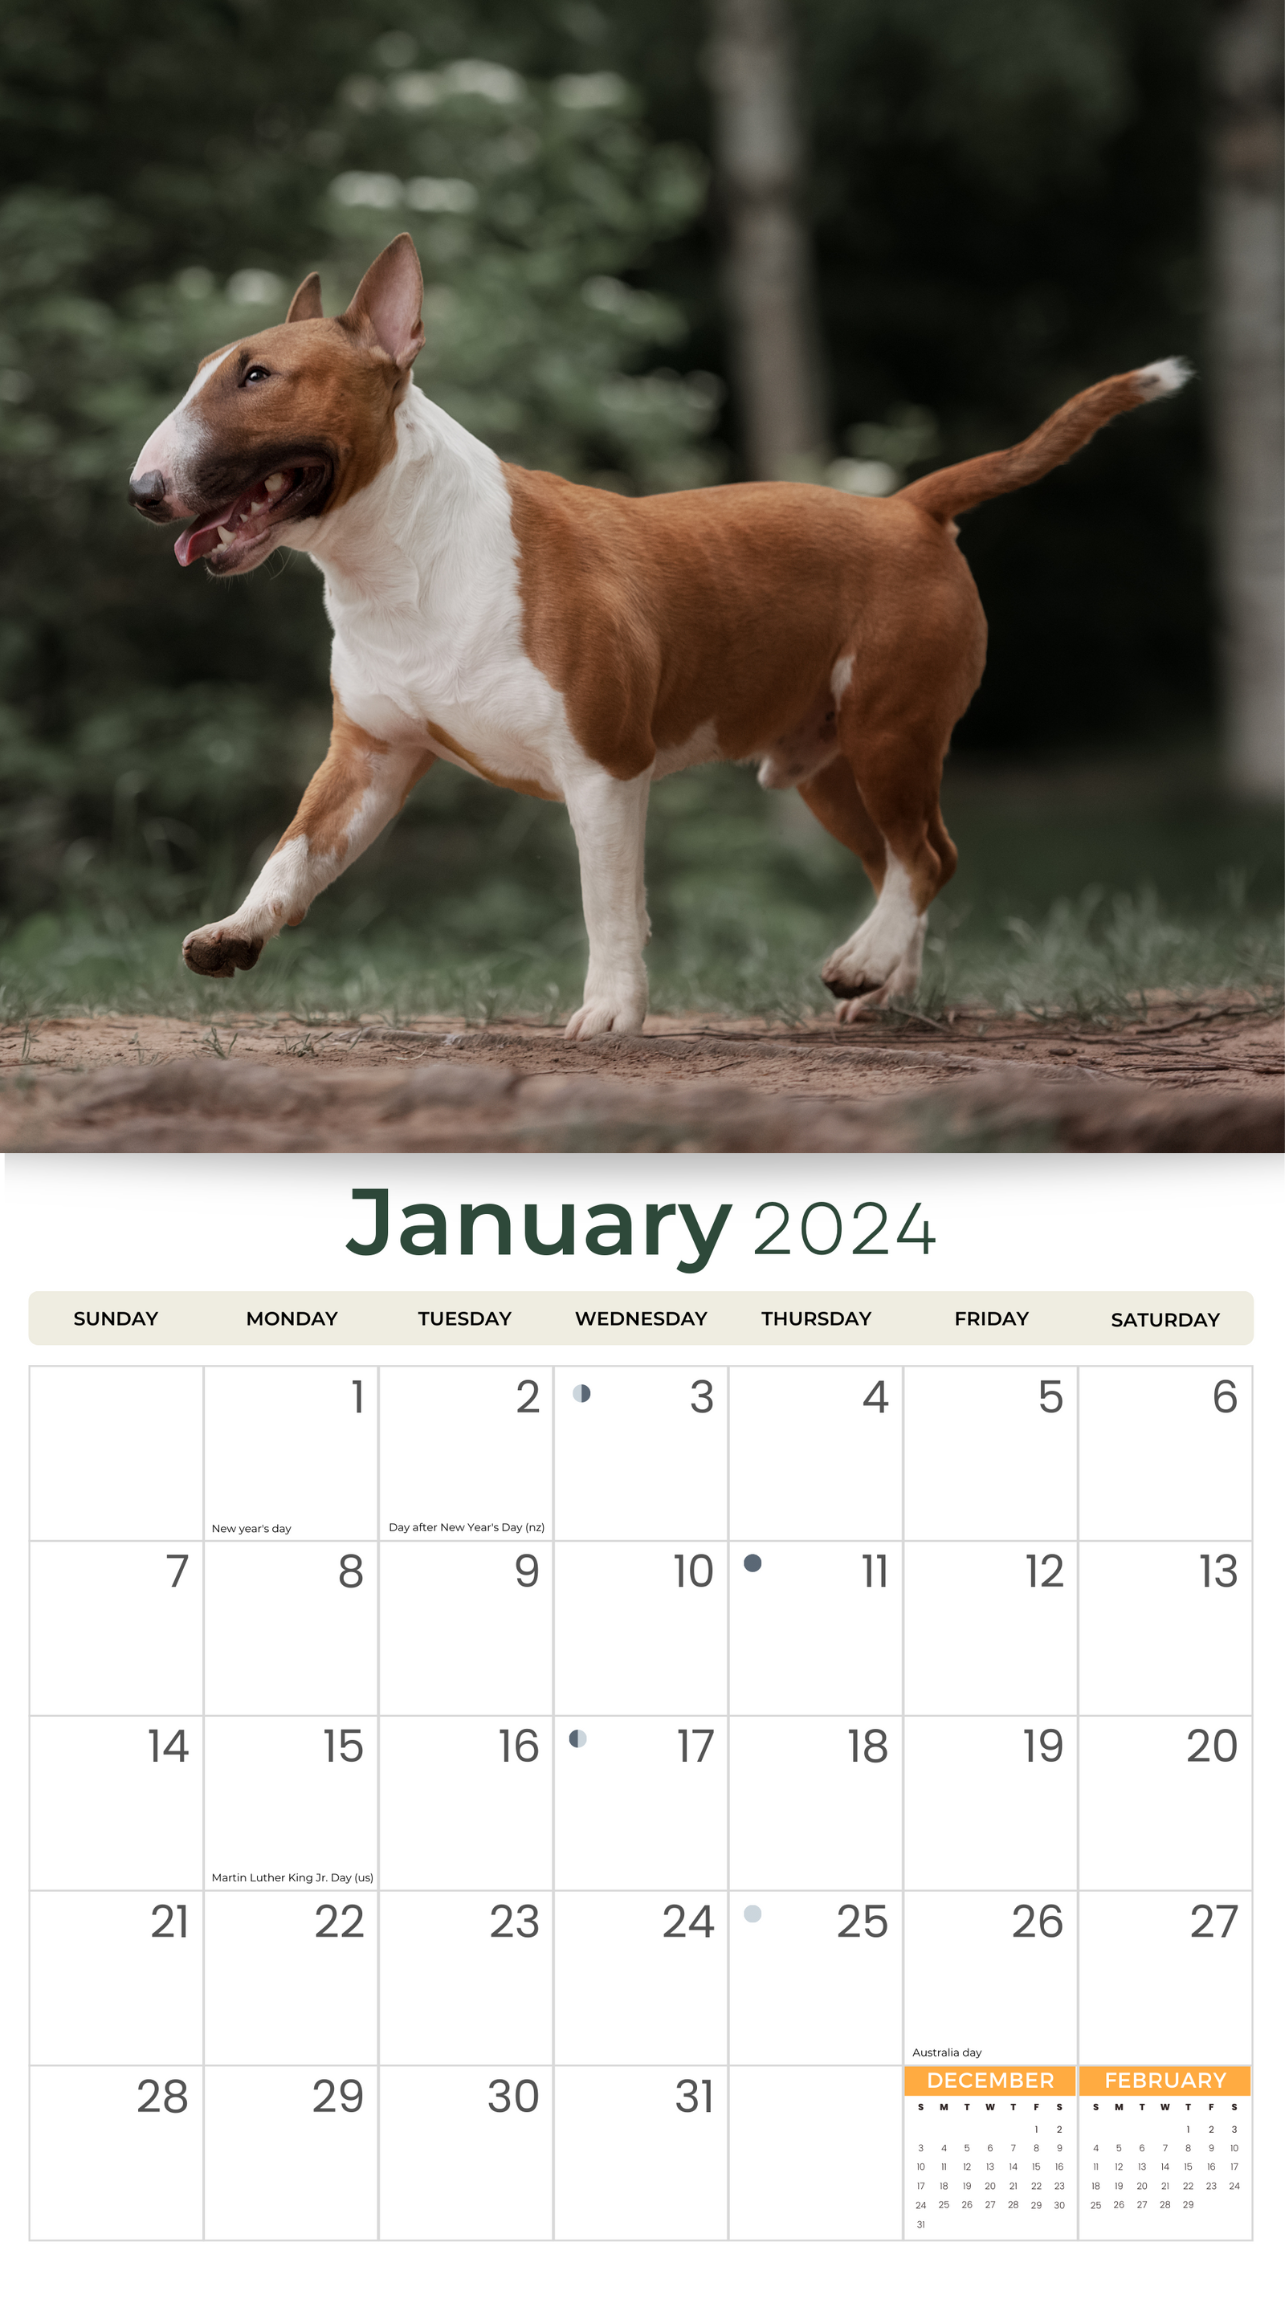 2024 Bull Terriers Dogs & Puppies - Deluxe Wall Calendar by Just Calendars - 16 Month - Plastic Free